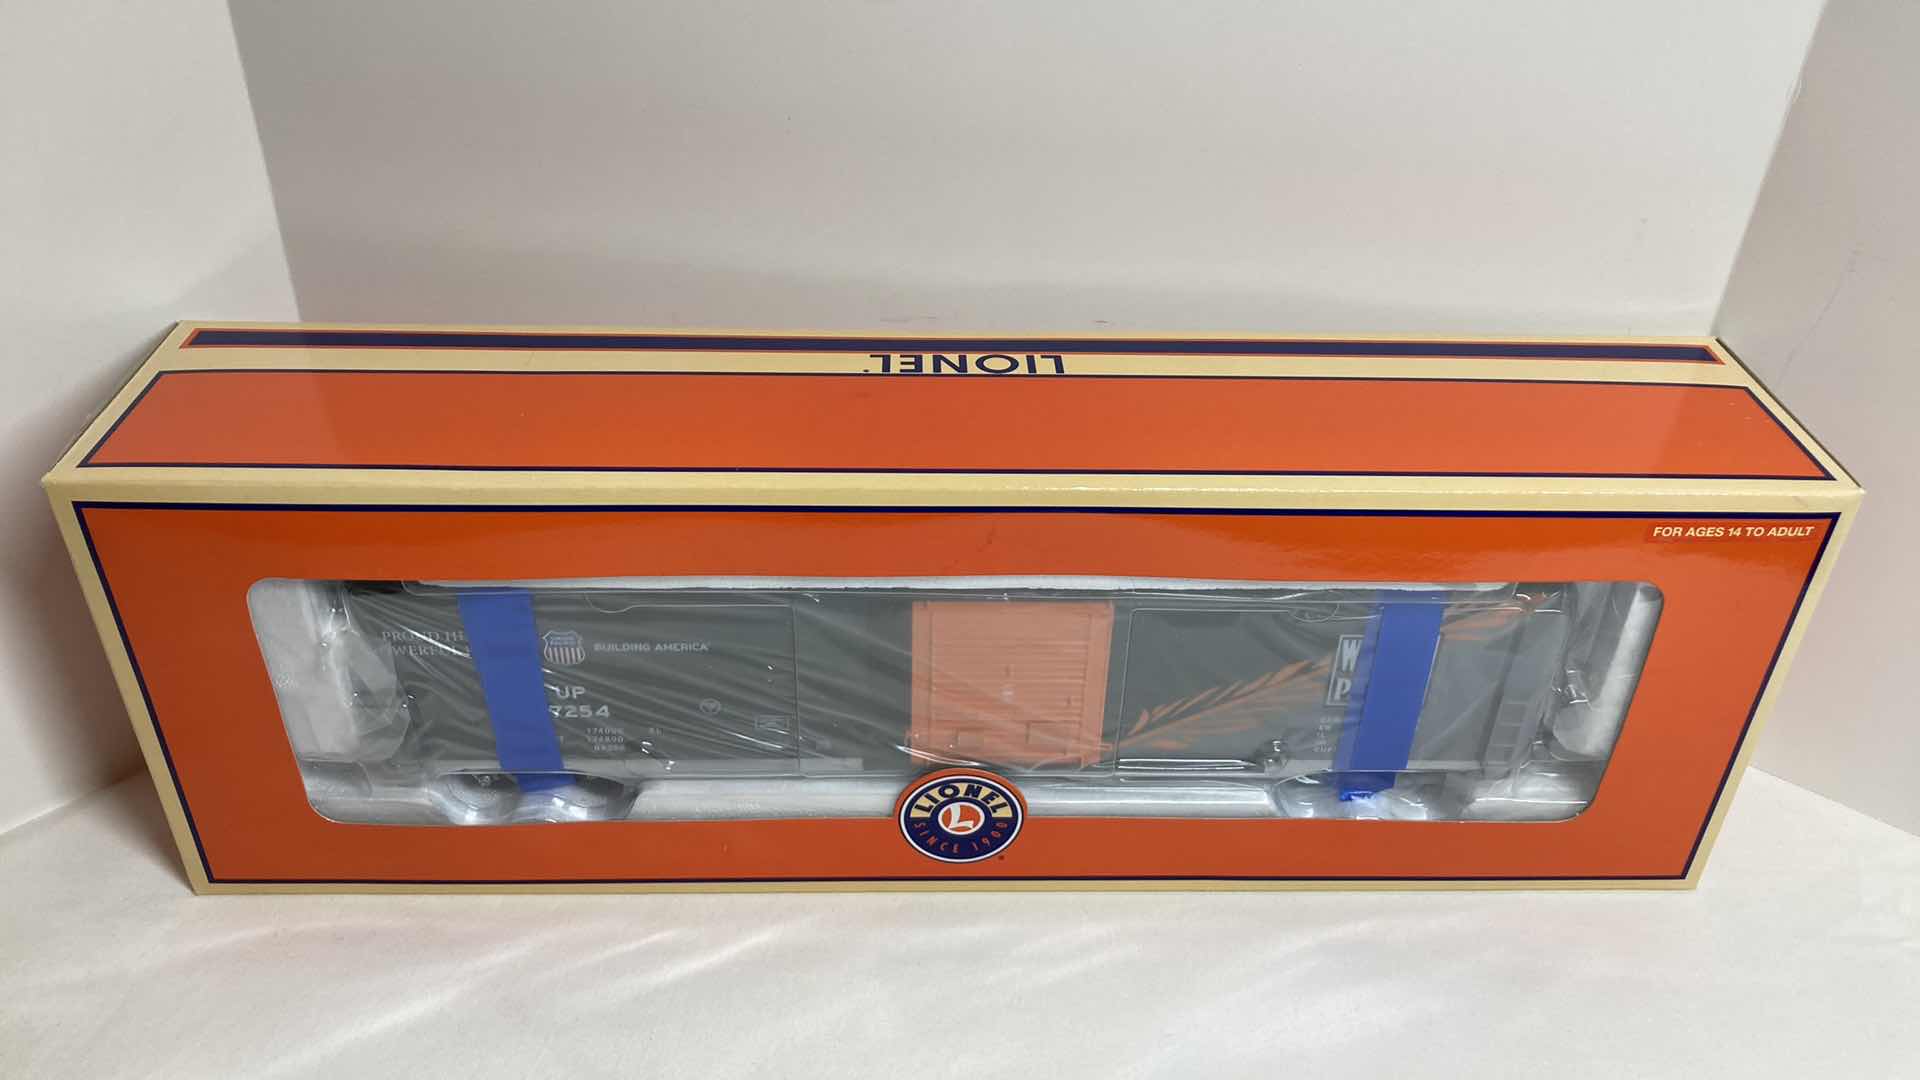 Photo 2 of LIONEL UP HERITAGE WP 60' BOXCAR
6-27254